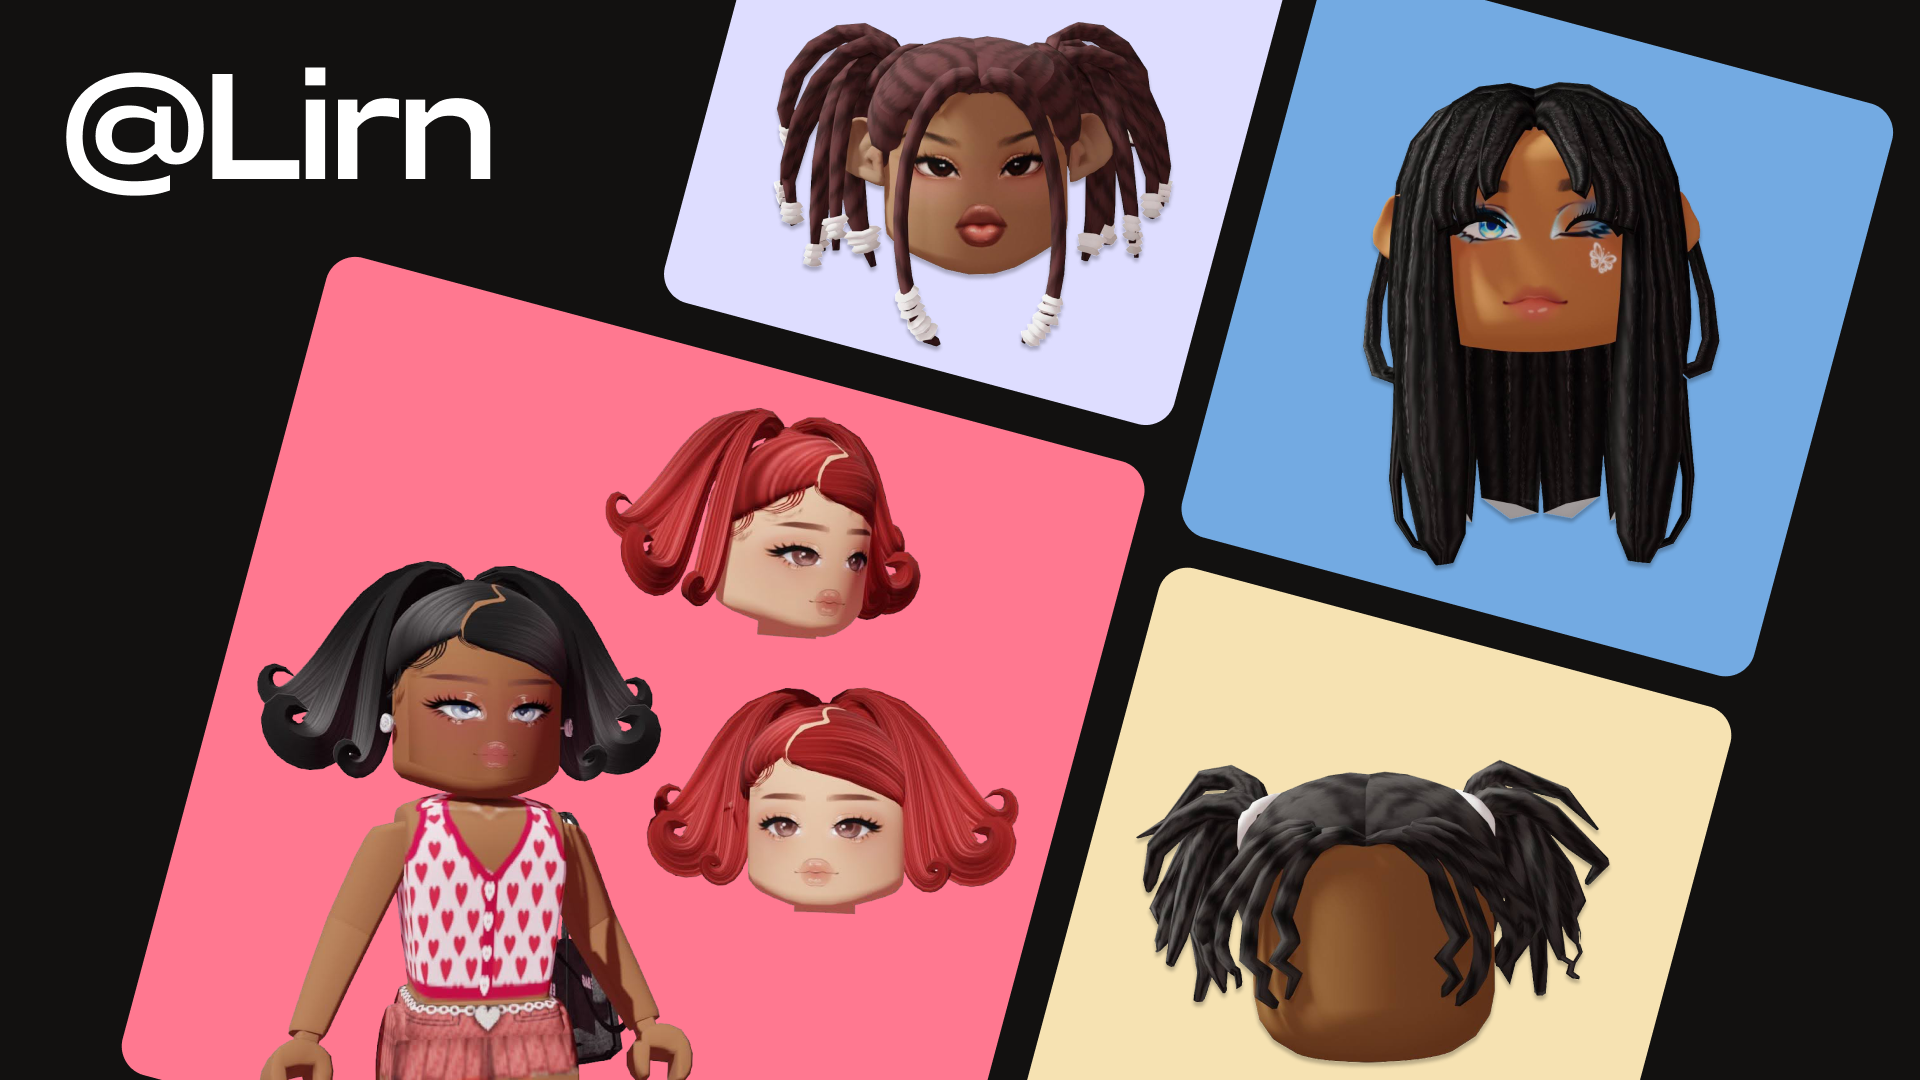 Lirn, an original Marketplace creator, wanted to fill a gap in gaming for authentic Black hairstyles.